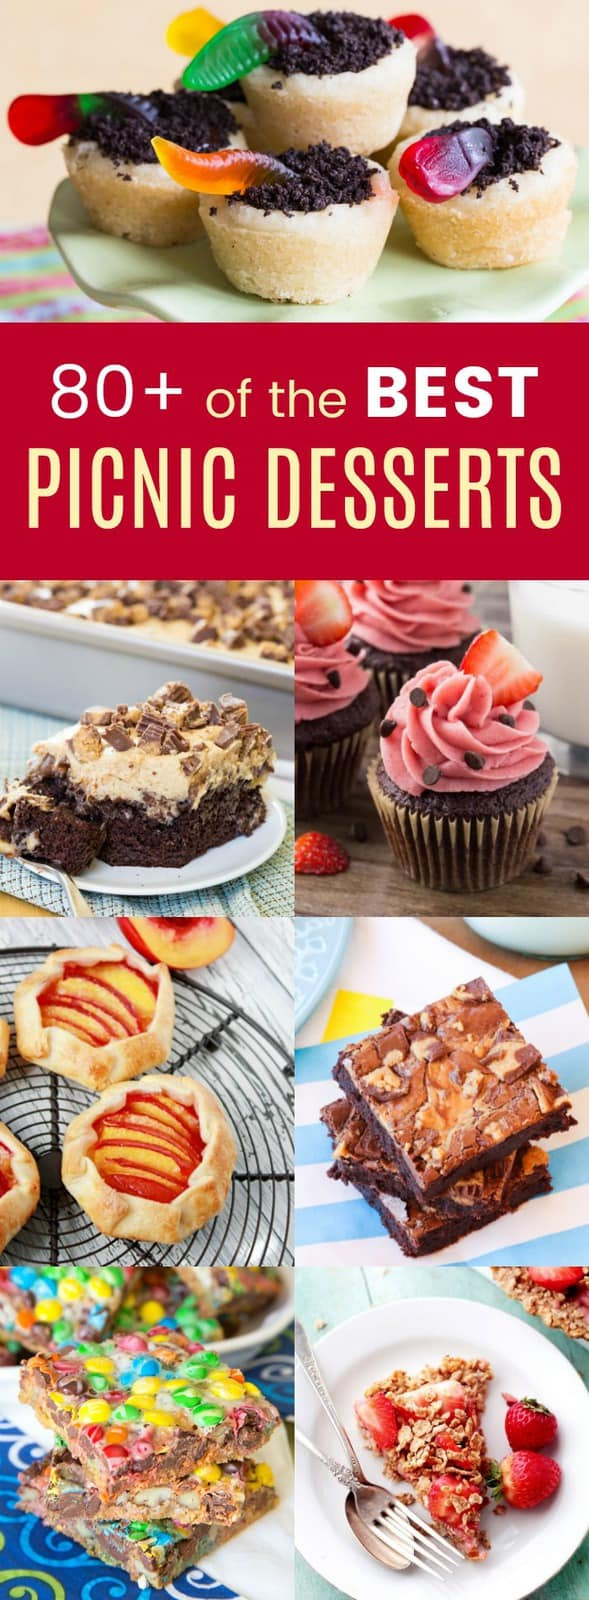 Summer Picnic Desserts
 Over 80 Recipes for Picnic Desserts Cupcakes & Kale Chips